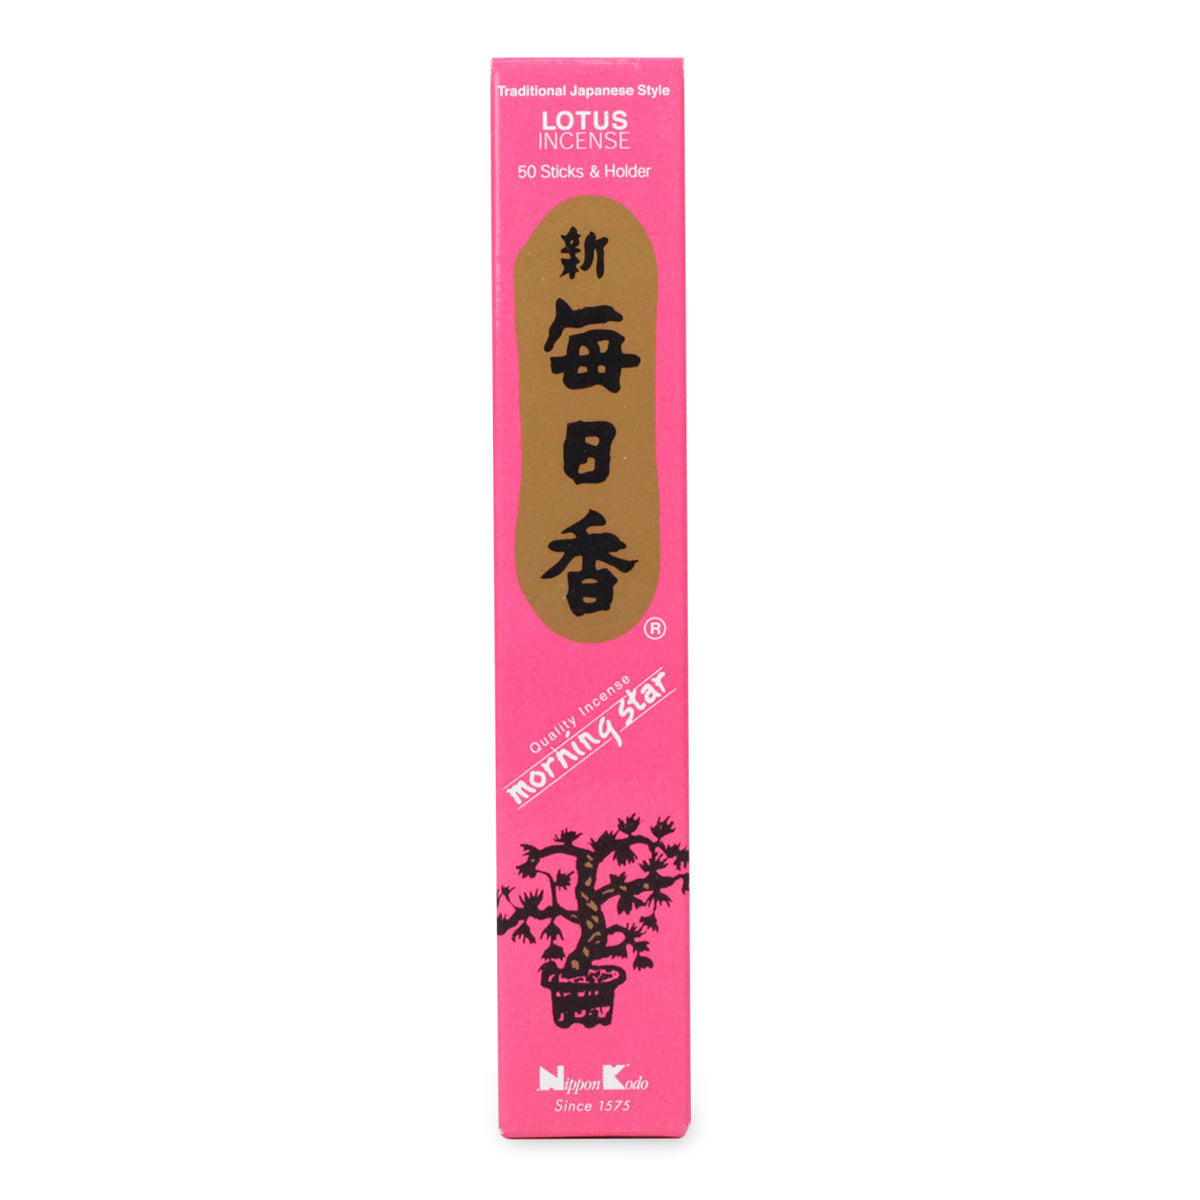 Primary image of Lotus Incense